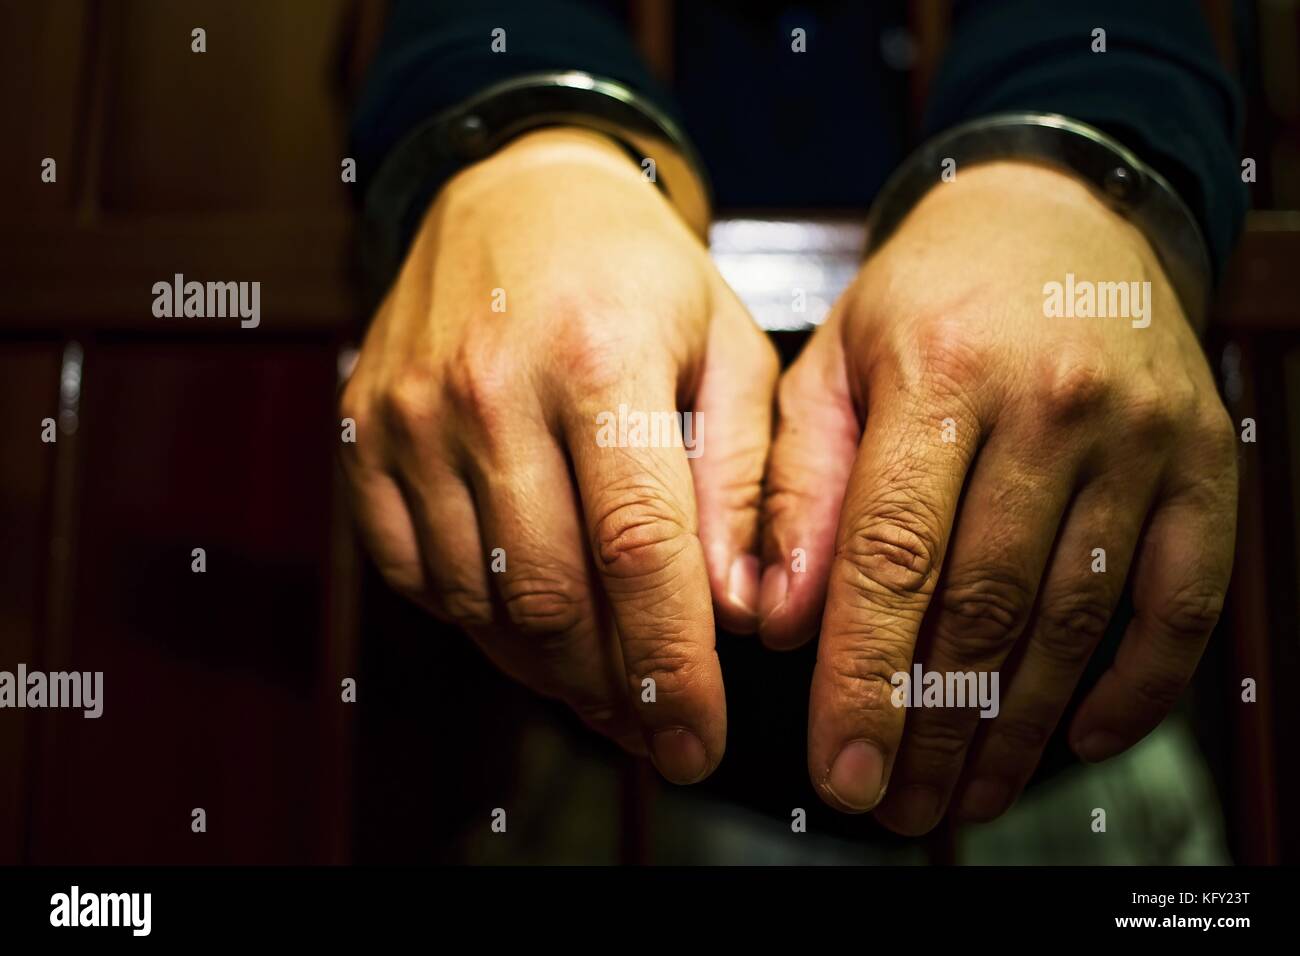 Abstract. Hands of the prisoner on a steel lattice close up. Prison, man in handcuffs. Detail of hands with steel handcuffs. Stock Photo